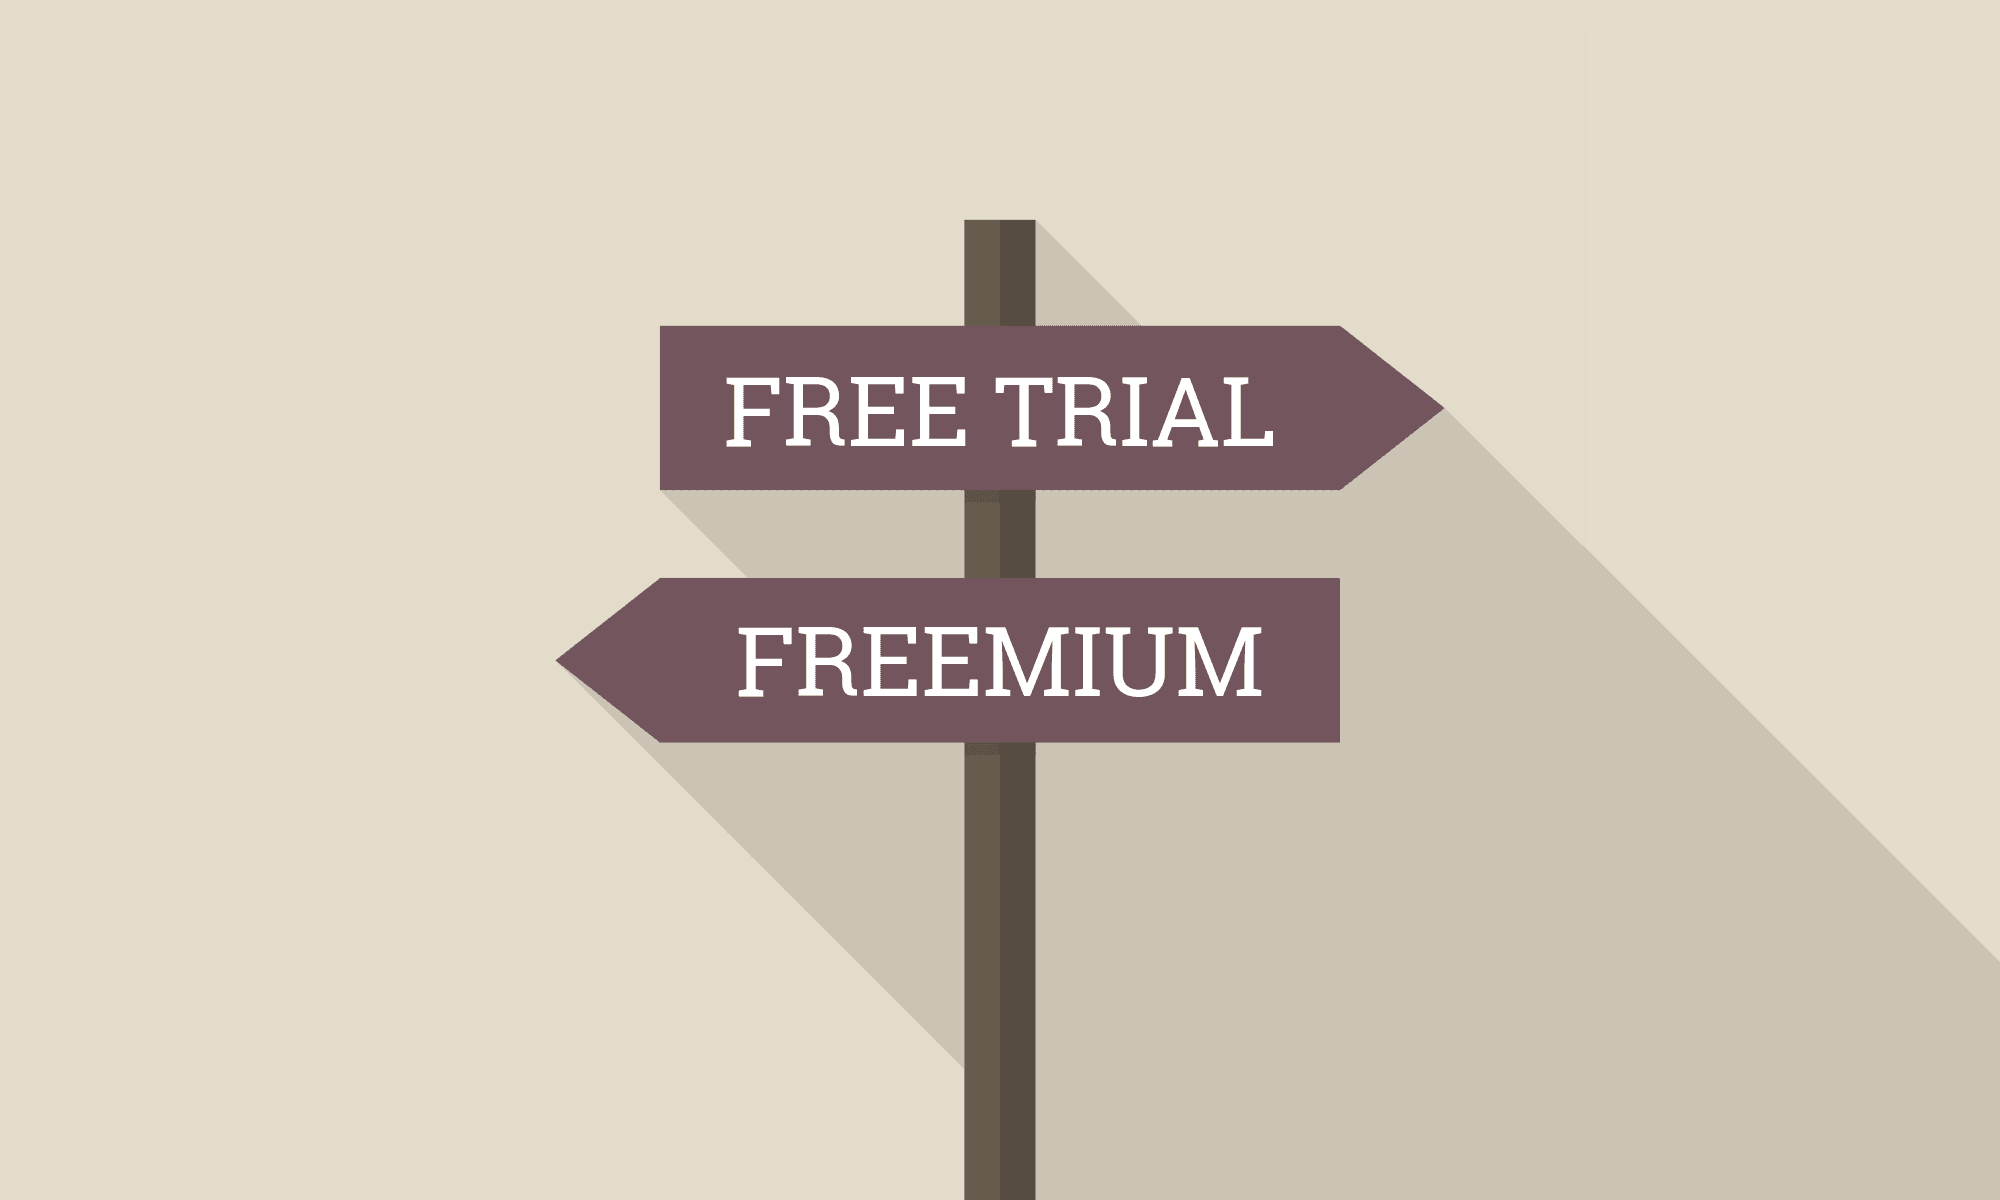 Trade-offs between freemium and free trial business models